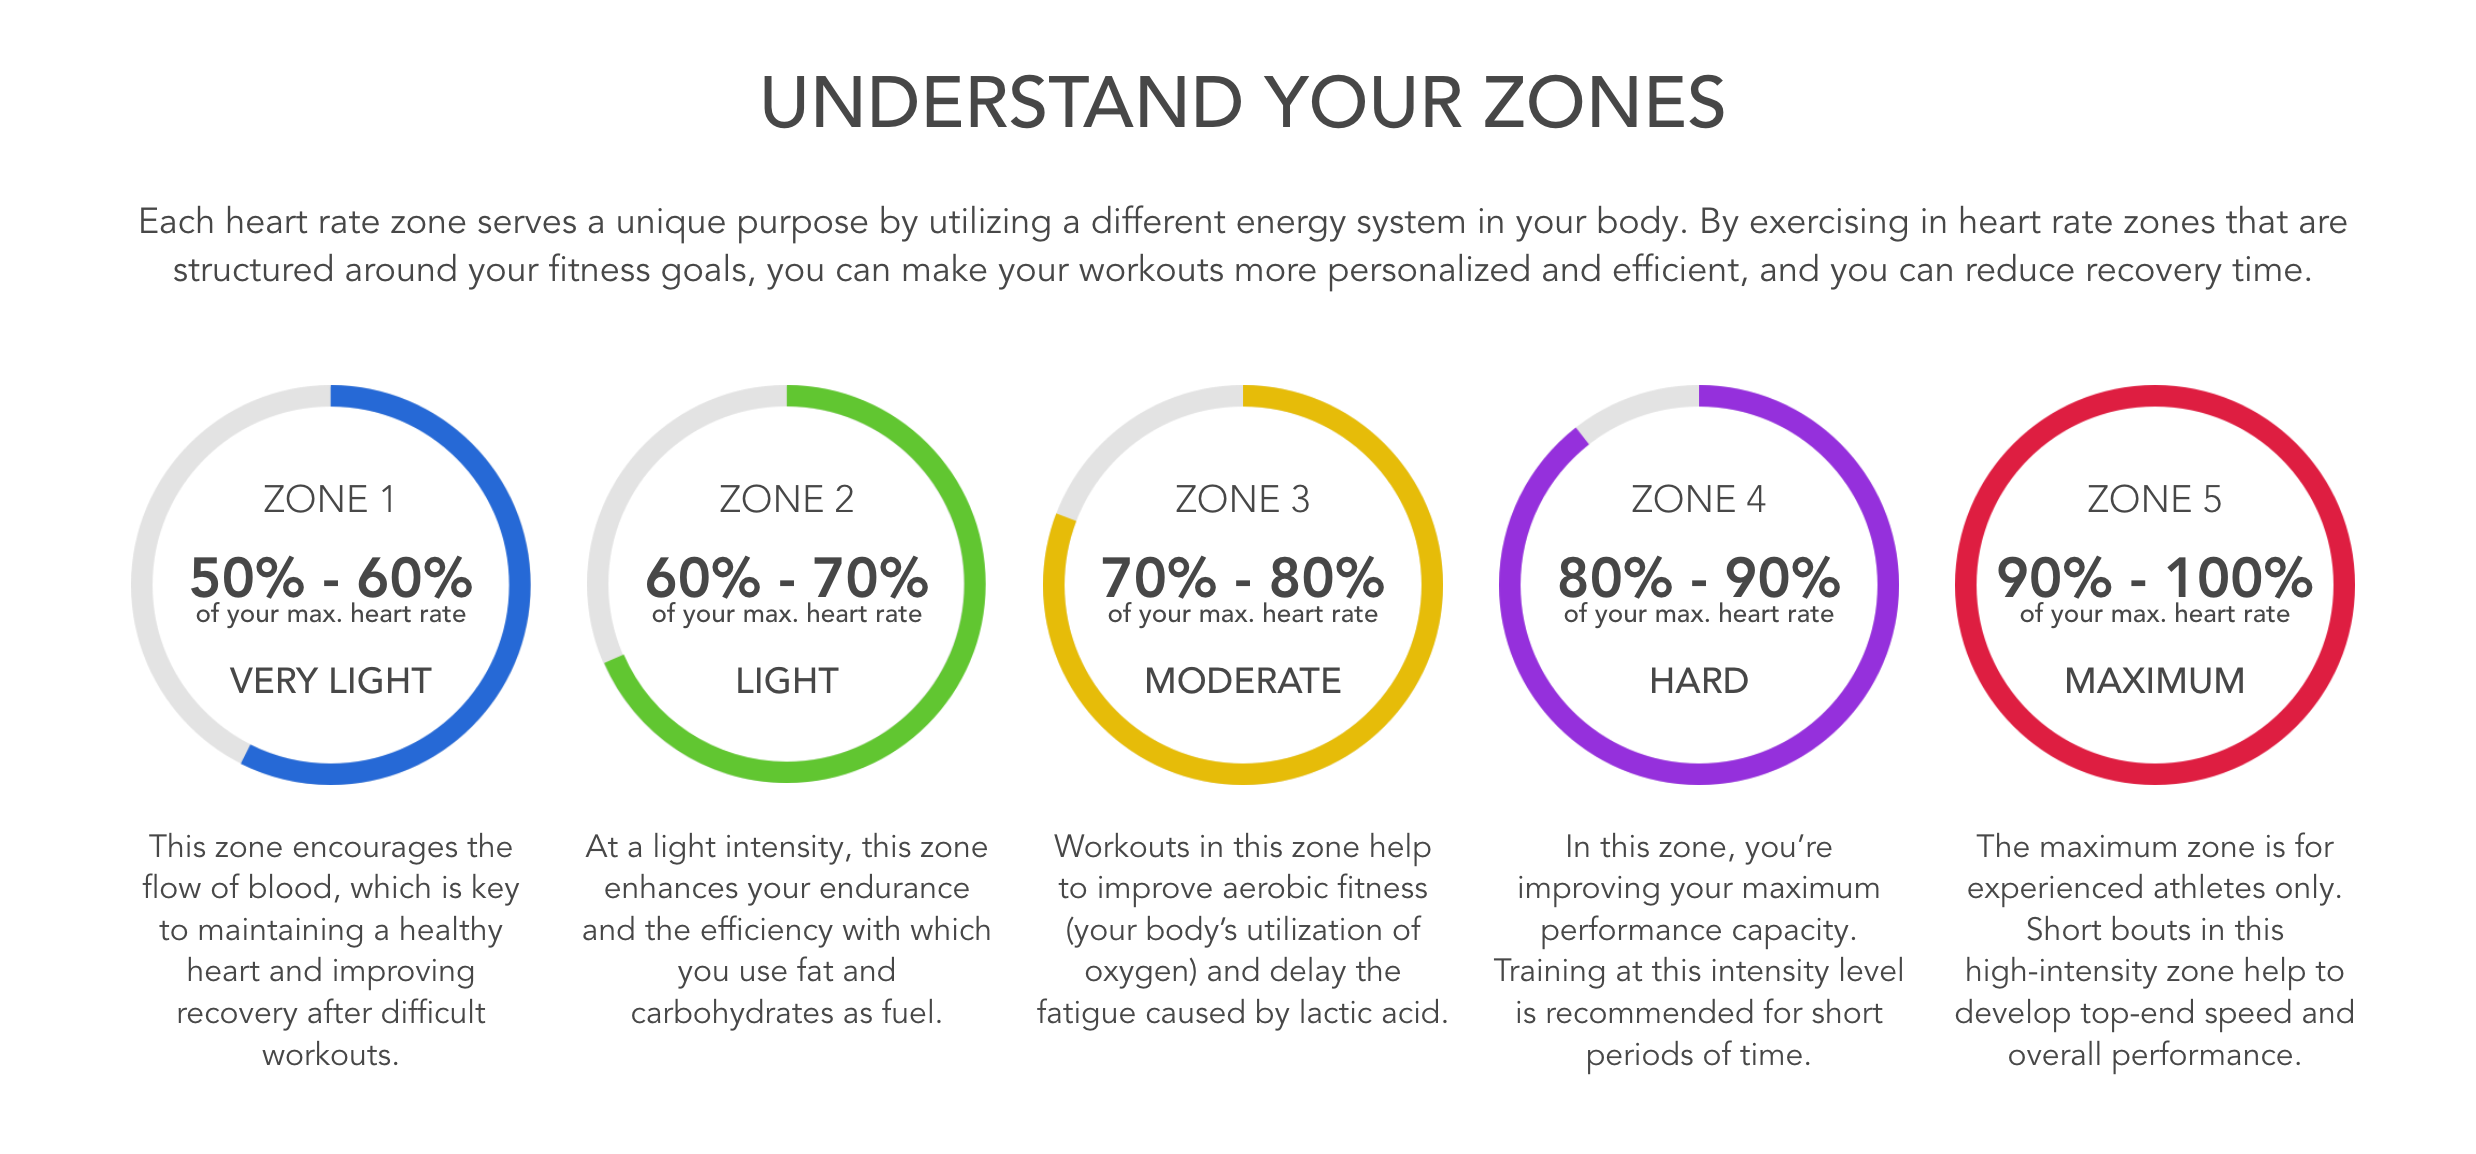 Each heart rate zone serves a unique purpose by utilizing a different energy system in your body. By exercising in heart rate zones that are structured round your fitness goals, you can make your workouts more personalized and efficient, and you can…